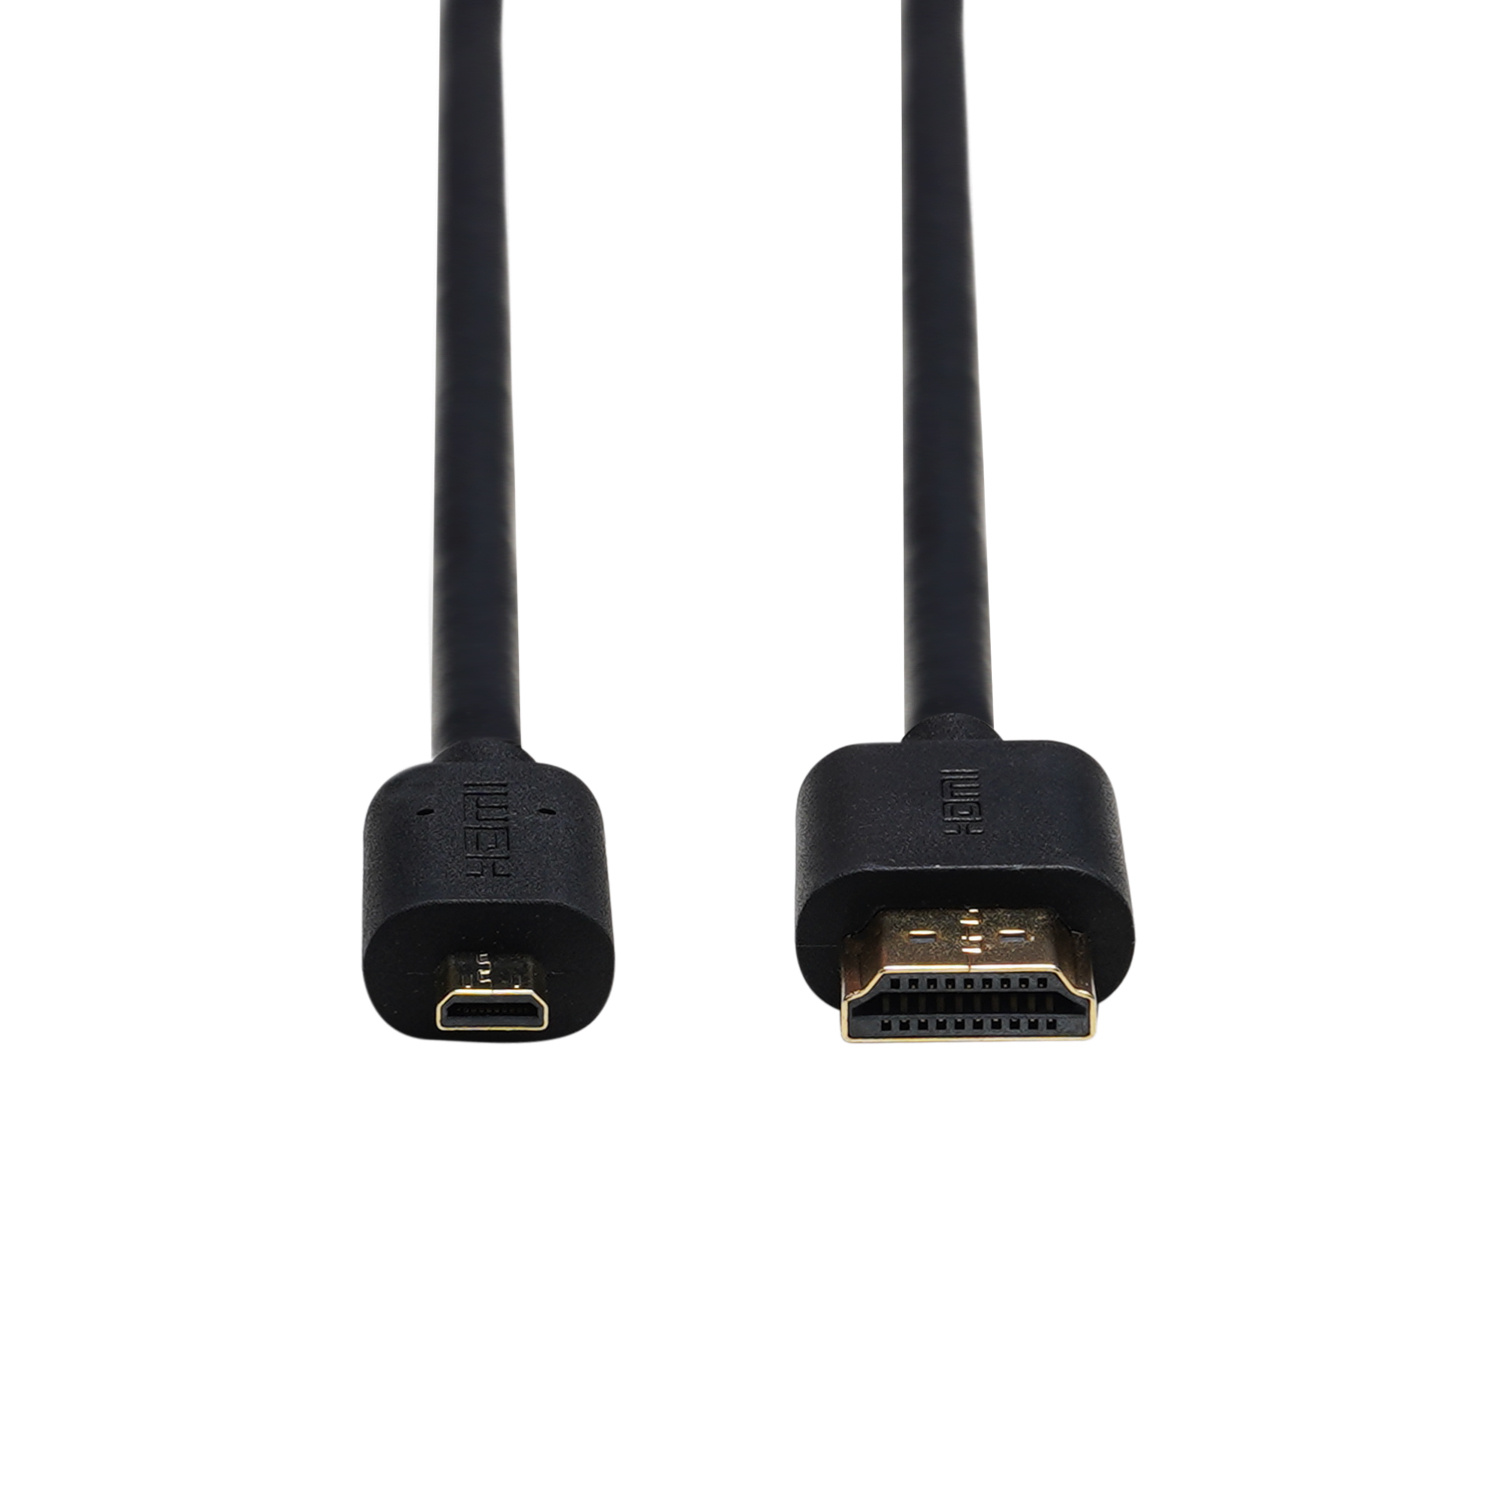 Micro HDMI cable：What You Need To Know Why You Need One